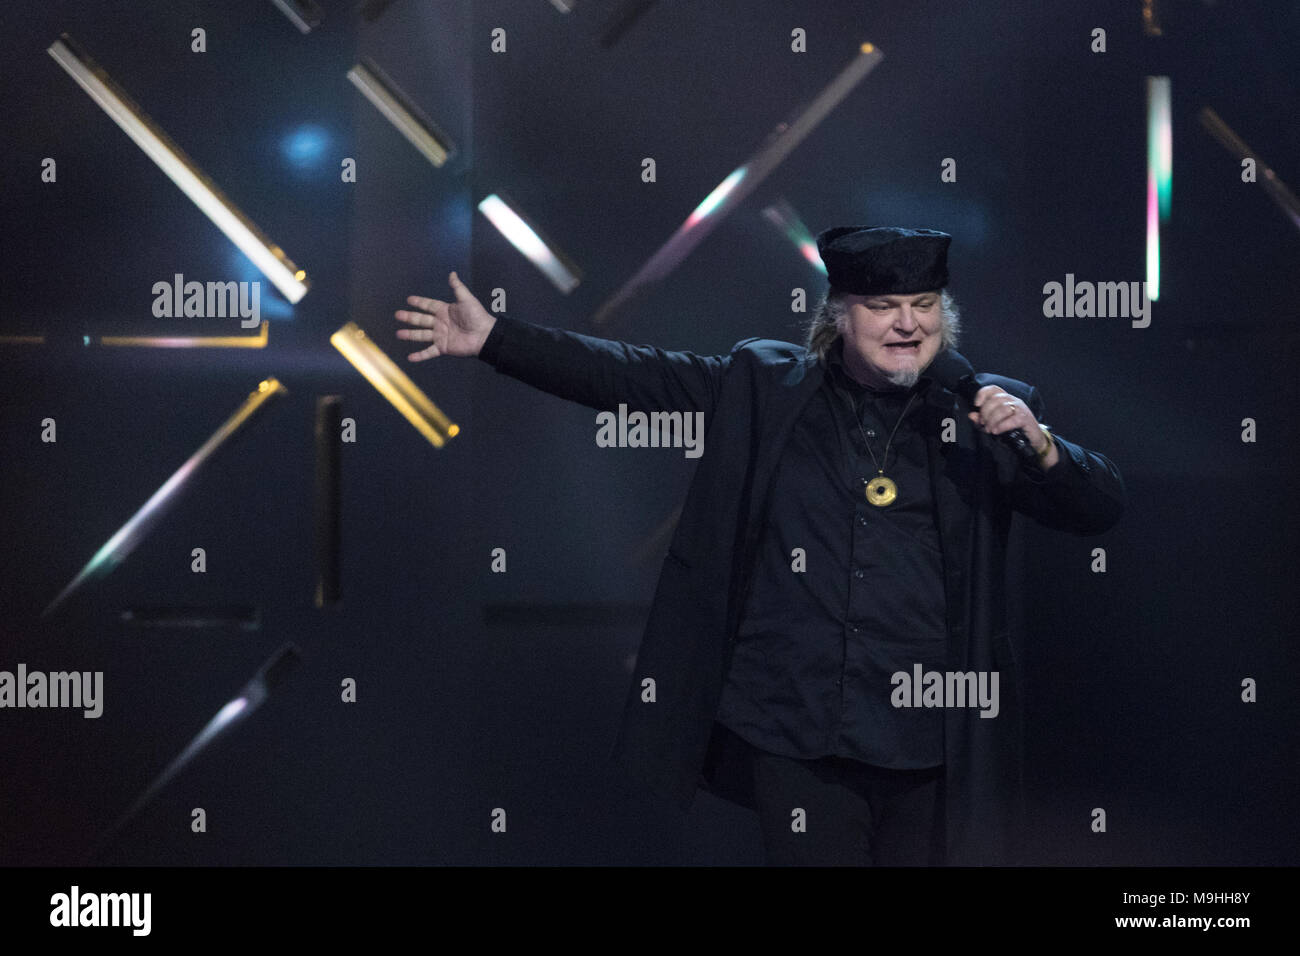 Norway, Oslo - February 25, 2018. The Norwegian blues guitarist Knut Reiersrud presents an award during the Norwegian Grammy Awards, Spellemannprisen 2017, at Oslo Konserthus in Oslo. (Photo credit: Gonzales Photo - Stian S. Moller). Stock Photo